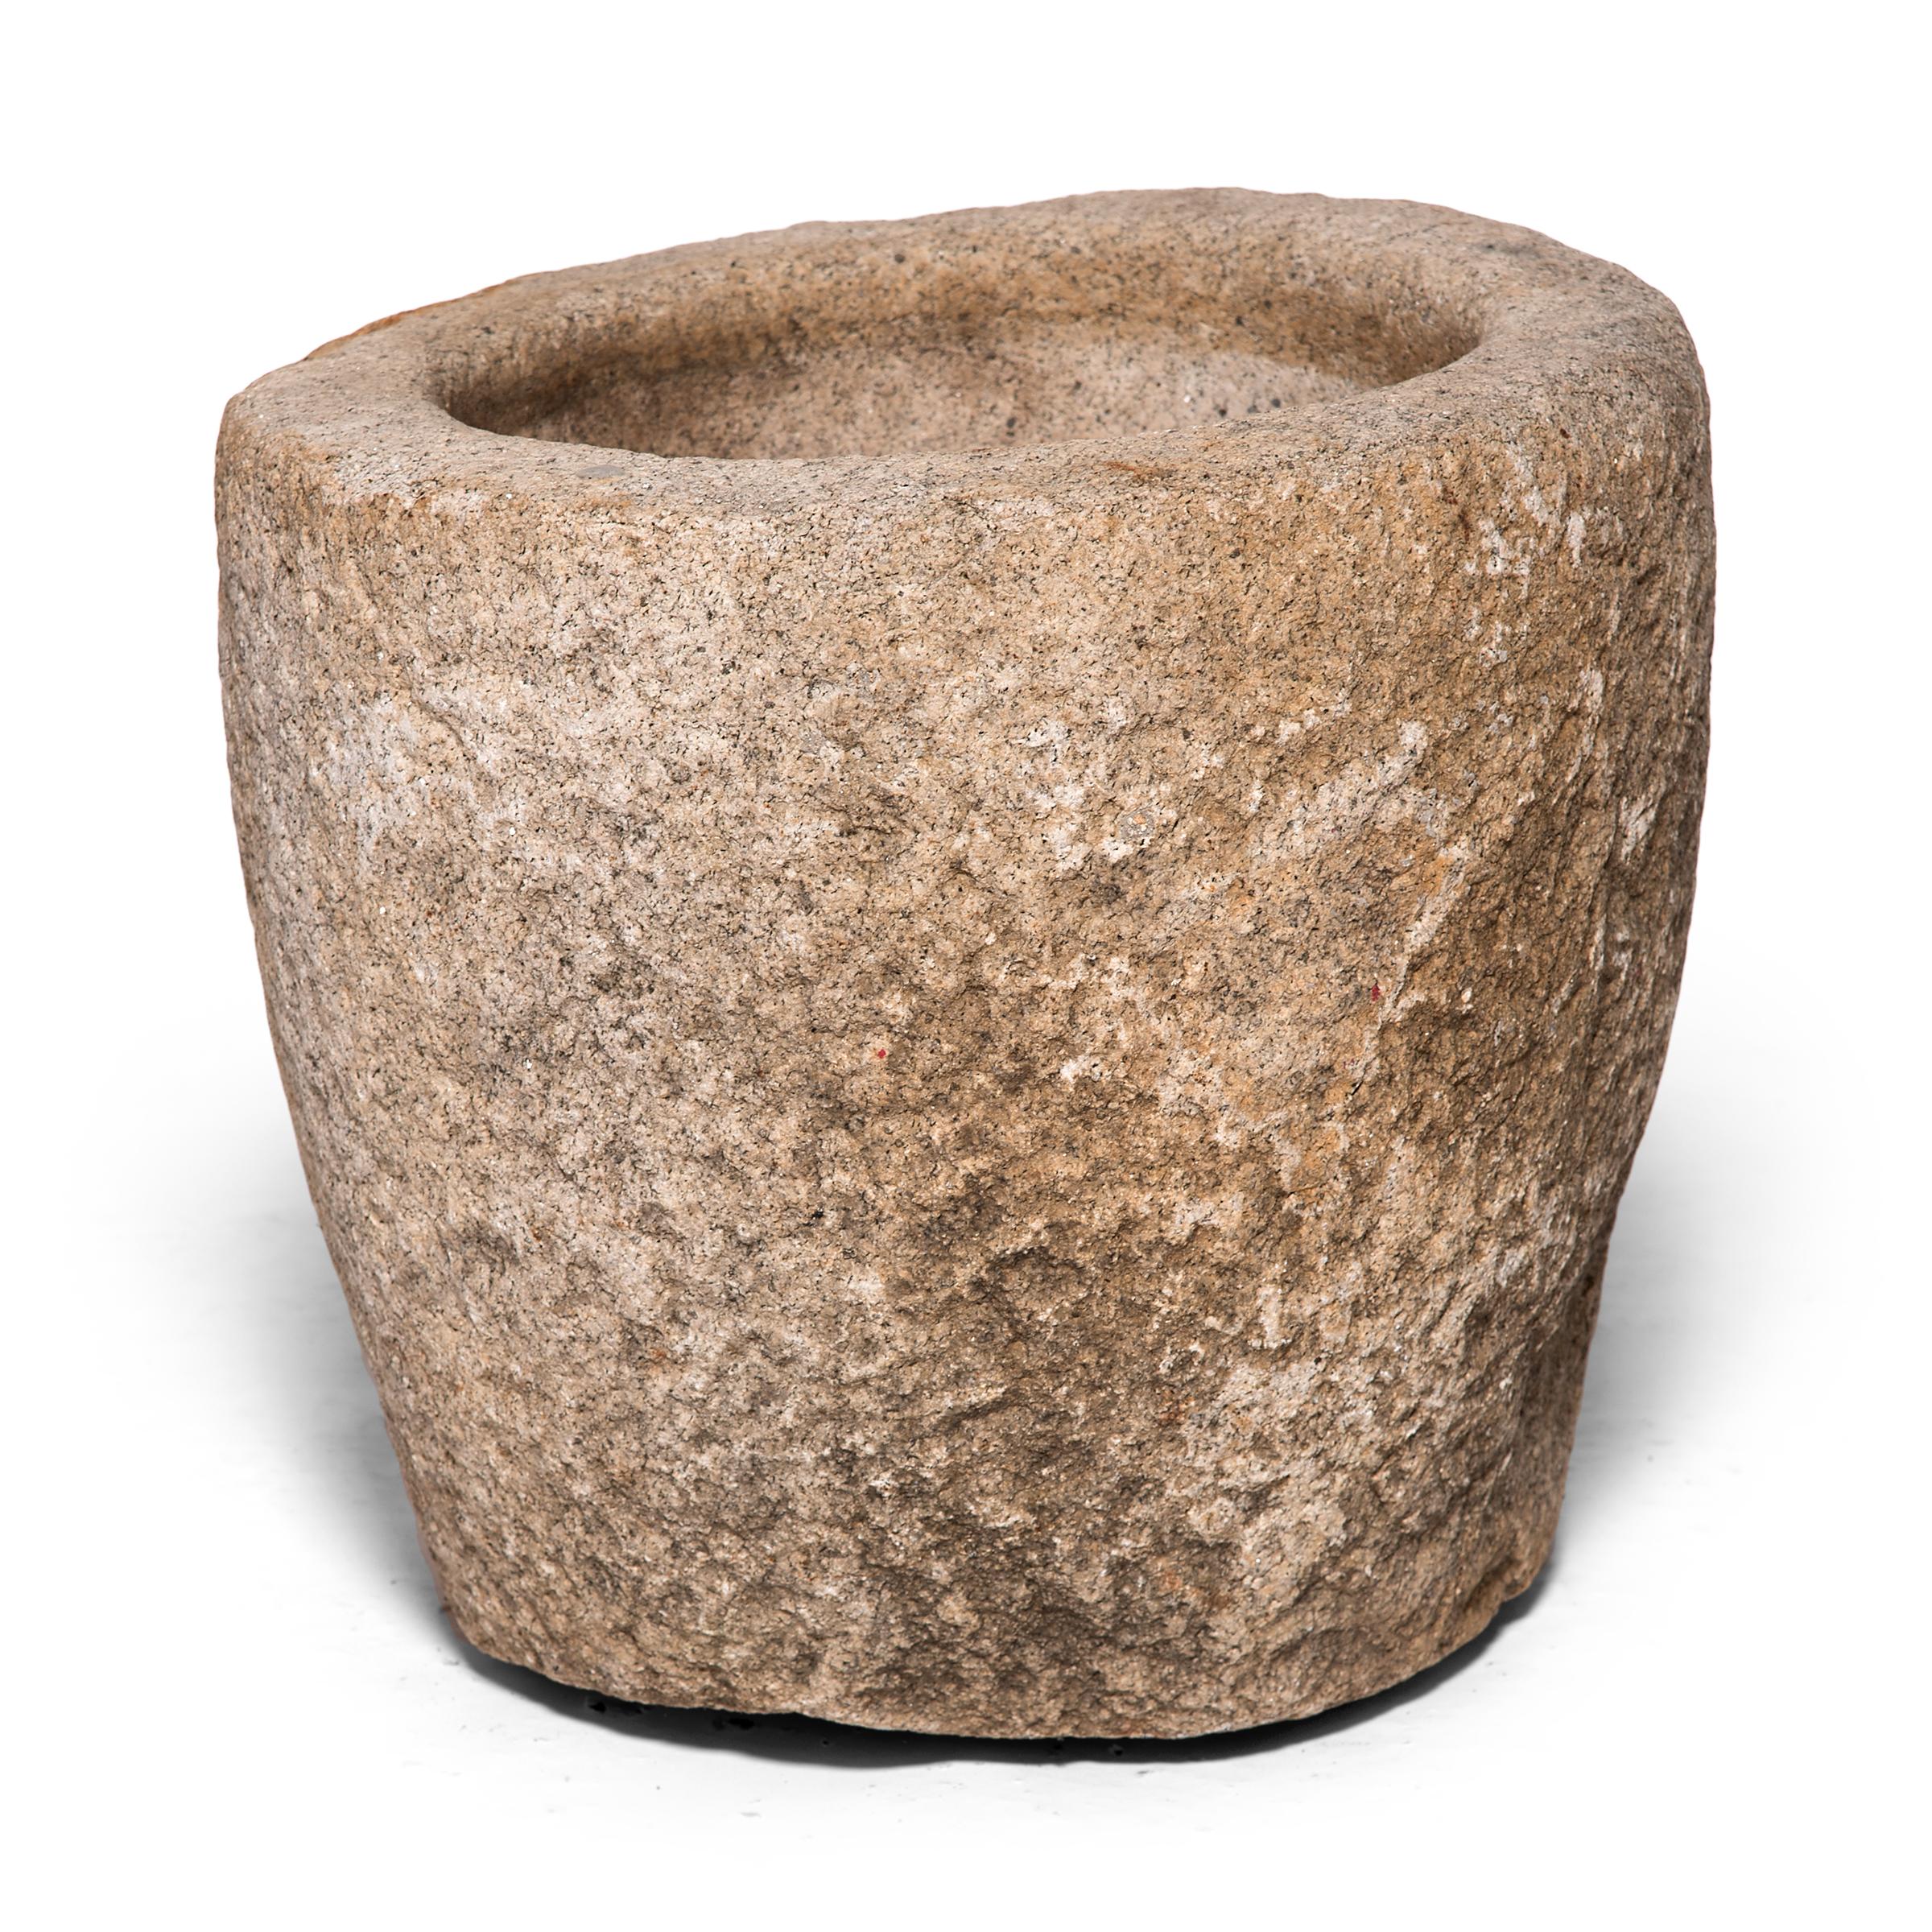 This round stone vessel was hand carved from a single block of granite by a Qing-dynasty artisan in China's Shanxi province. Originally used as a grain mortar, we love the piece as a shallow planter or birdbath in a garden or patio.

Additional